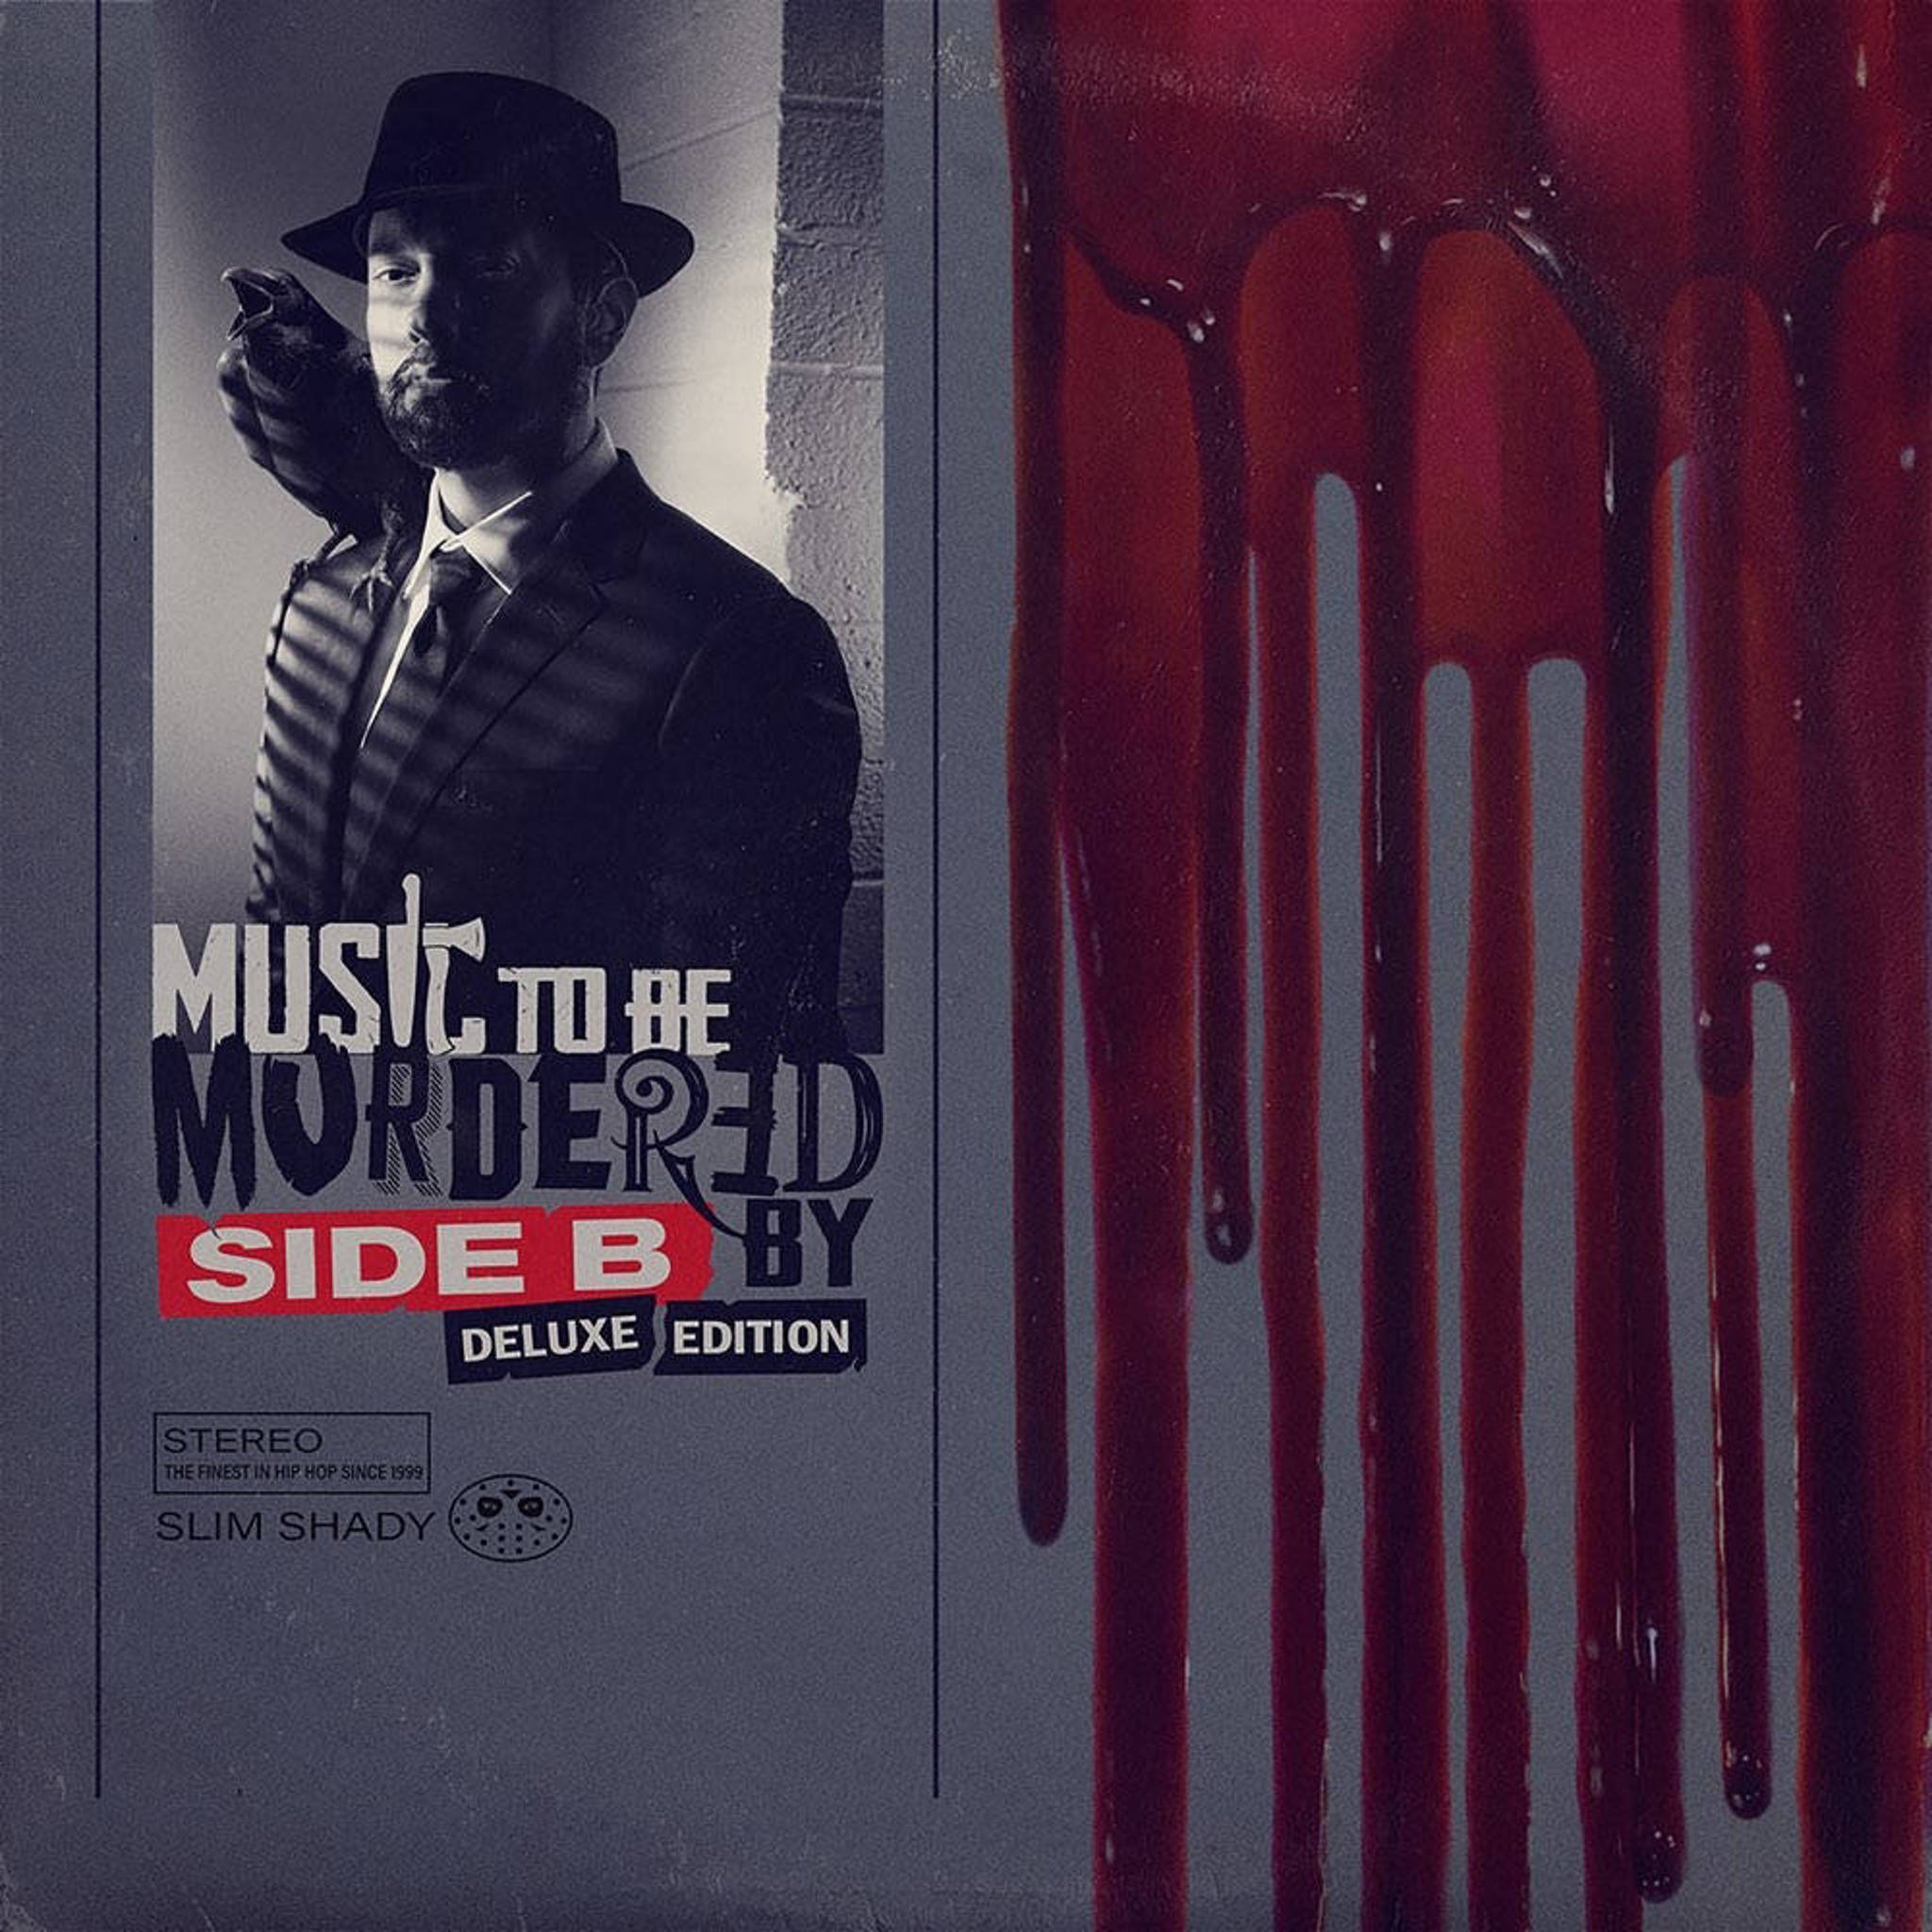 Eminem-Music To Be Murdered By-Side B (Deluxe Edition)-16BIT-WEBFLAC-2020-MenInFlac Download